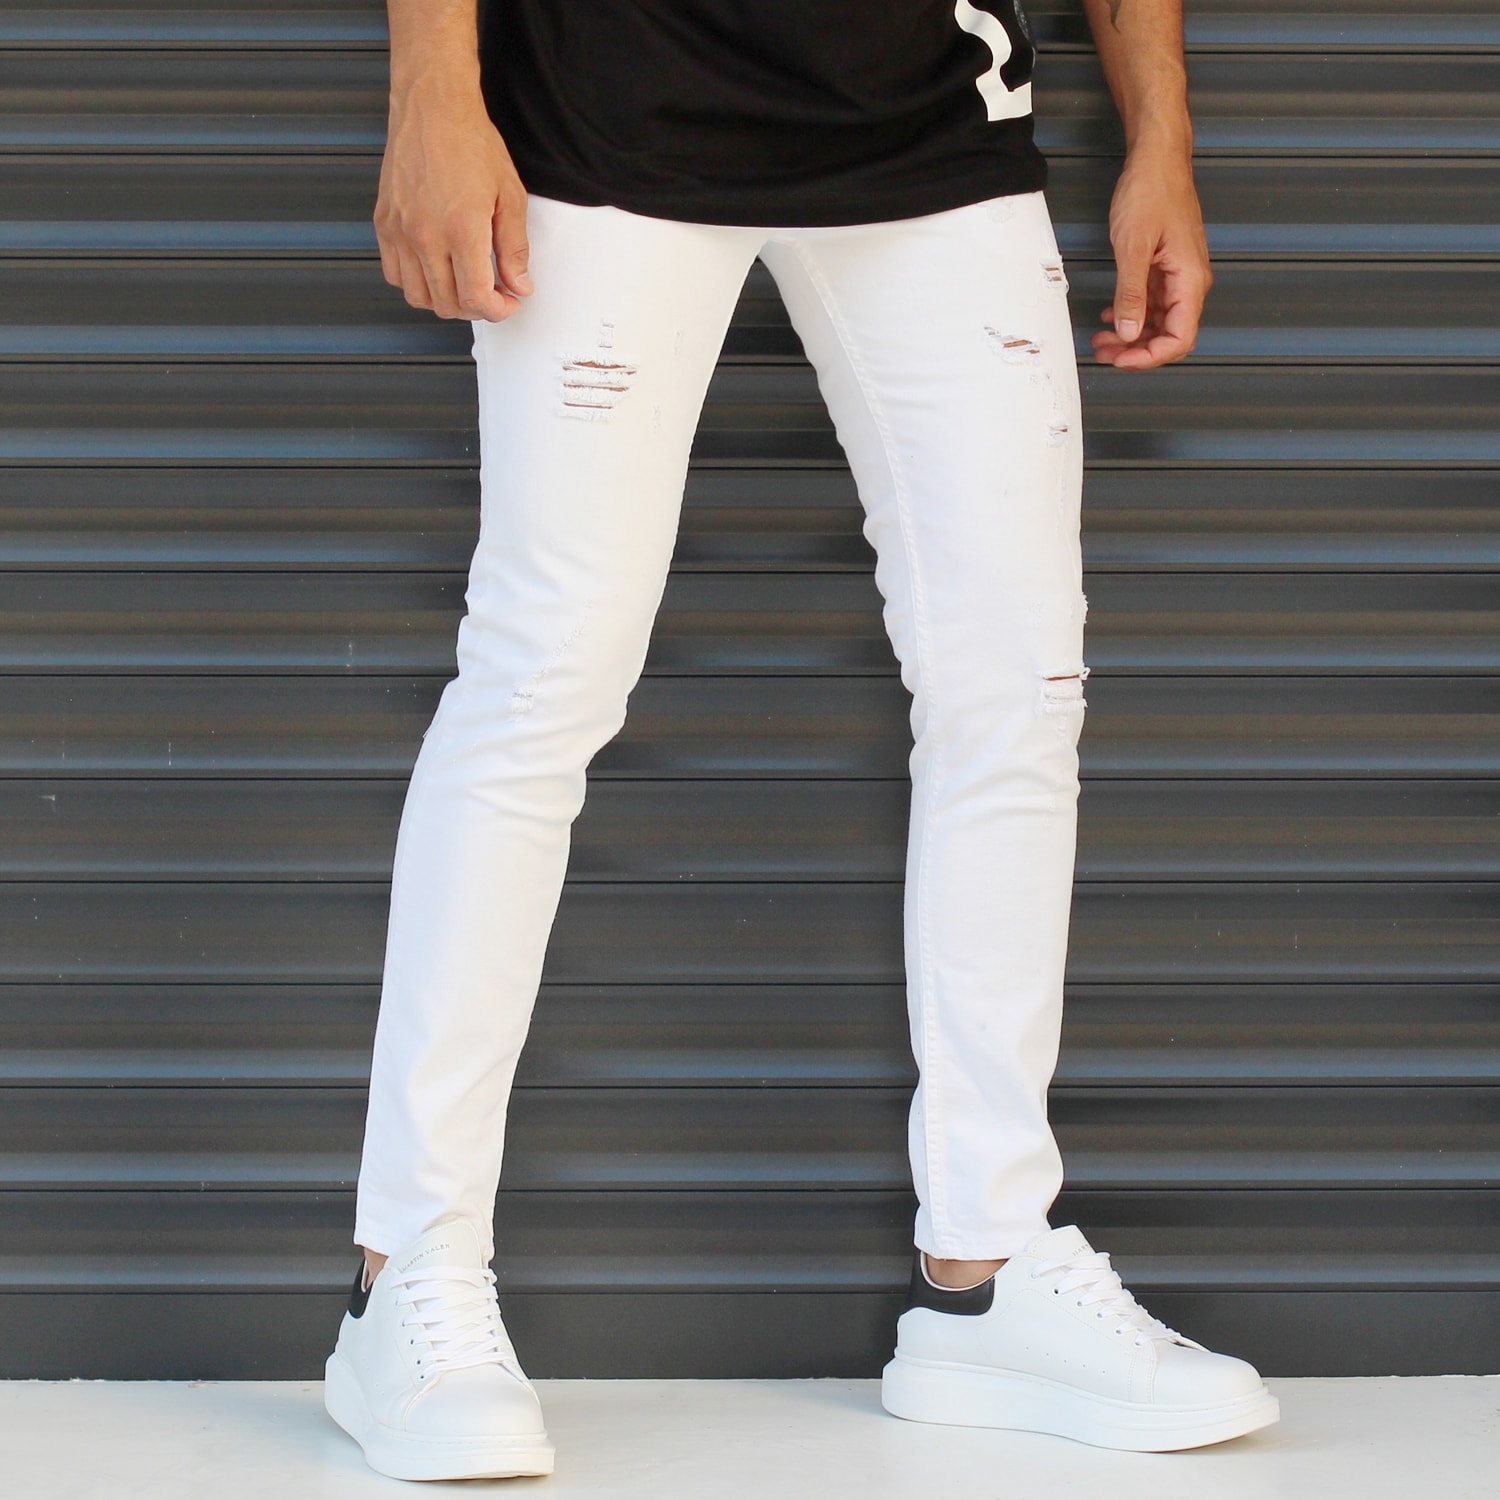 Men's Skinny Jeans With Thin Rips In White